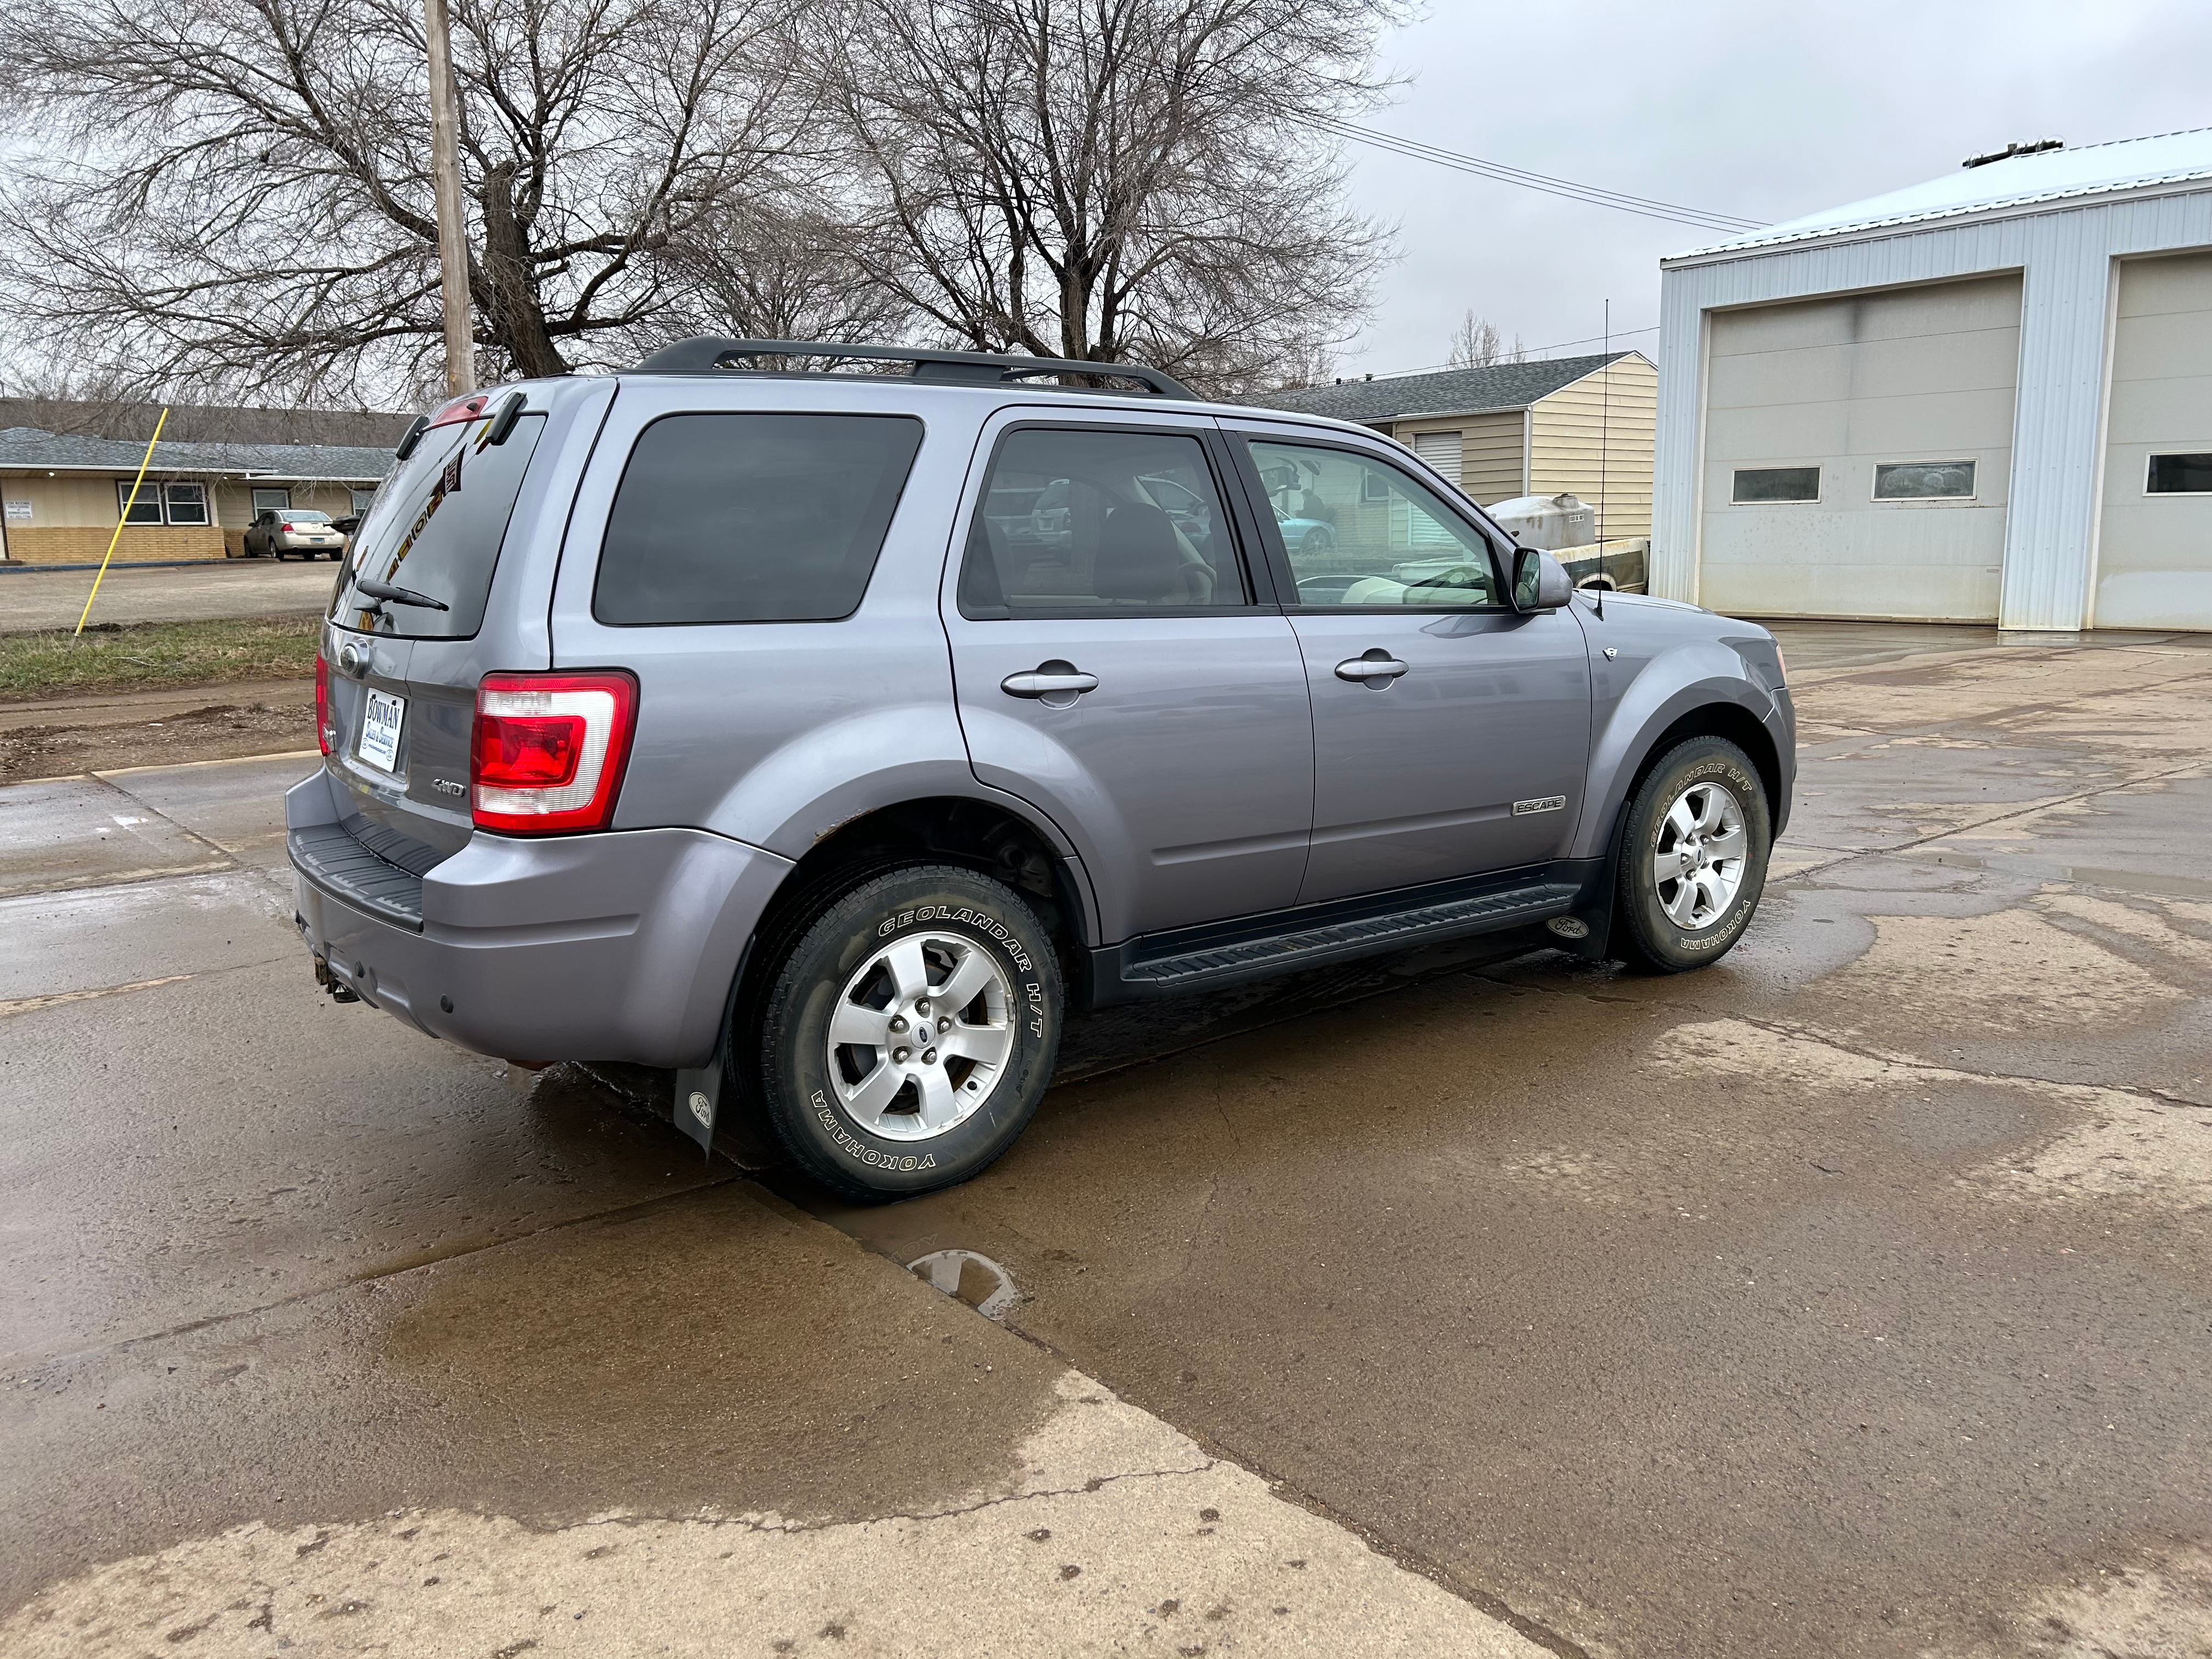 Used 2008 Ford Escape Limited with VIN 1FMCU94198KA65949 for sale in Bowman, ND